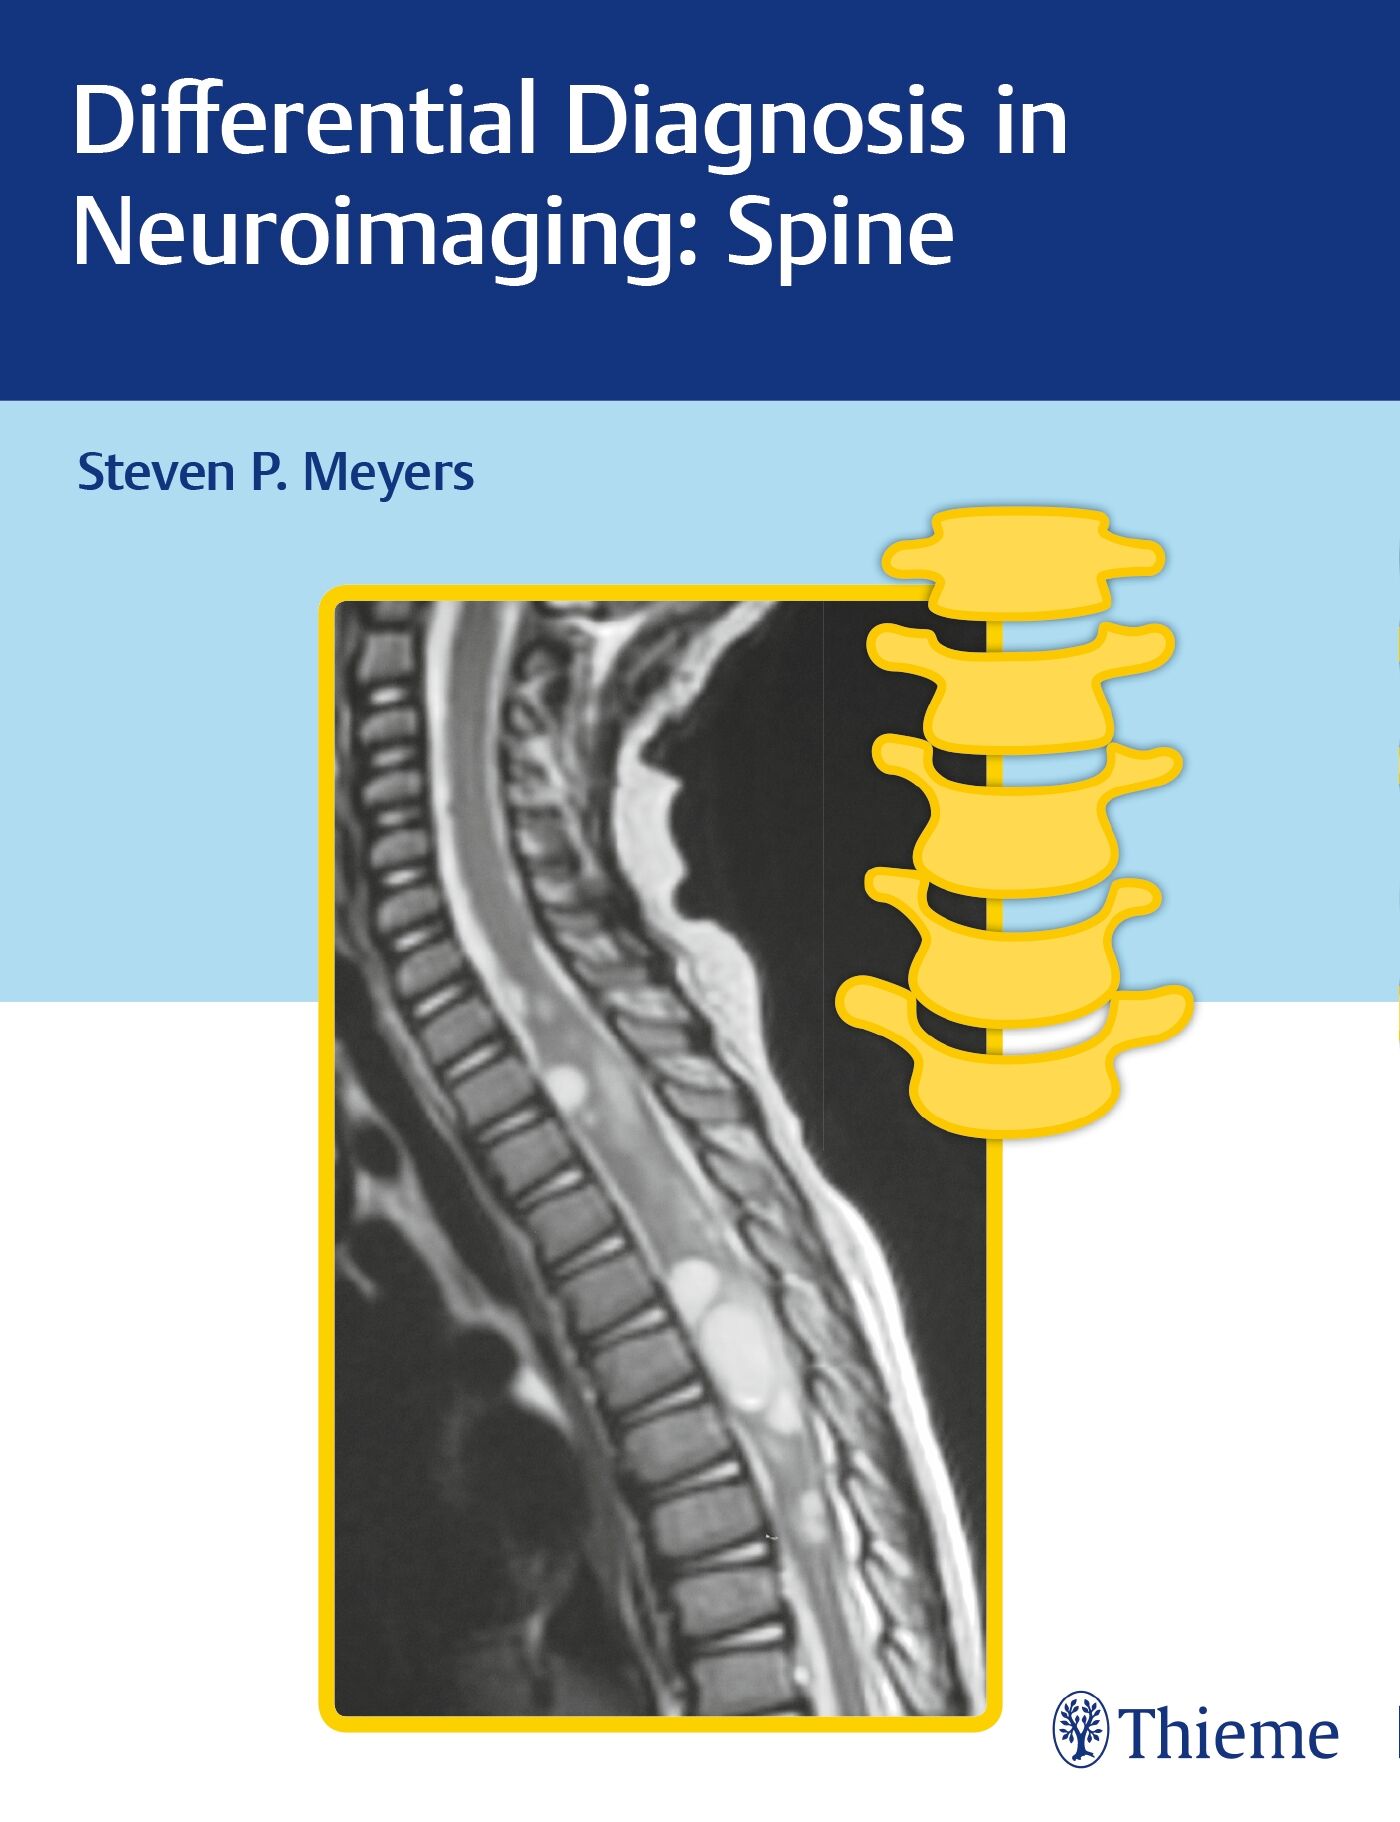 Differential Diagnosis in Neuroimaging: Spine, 9781626234772